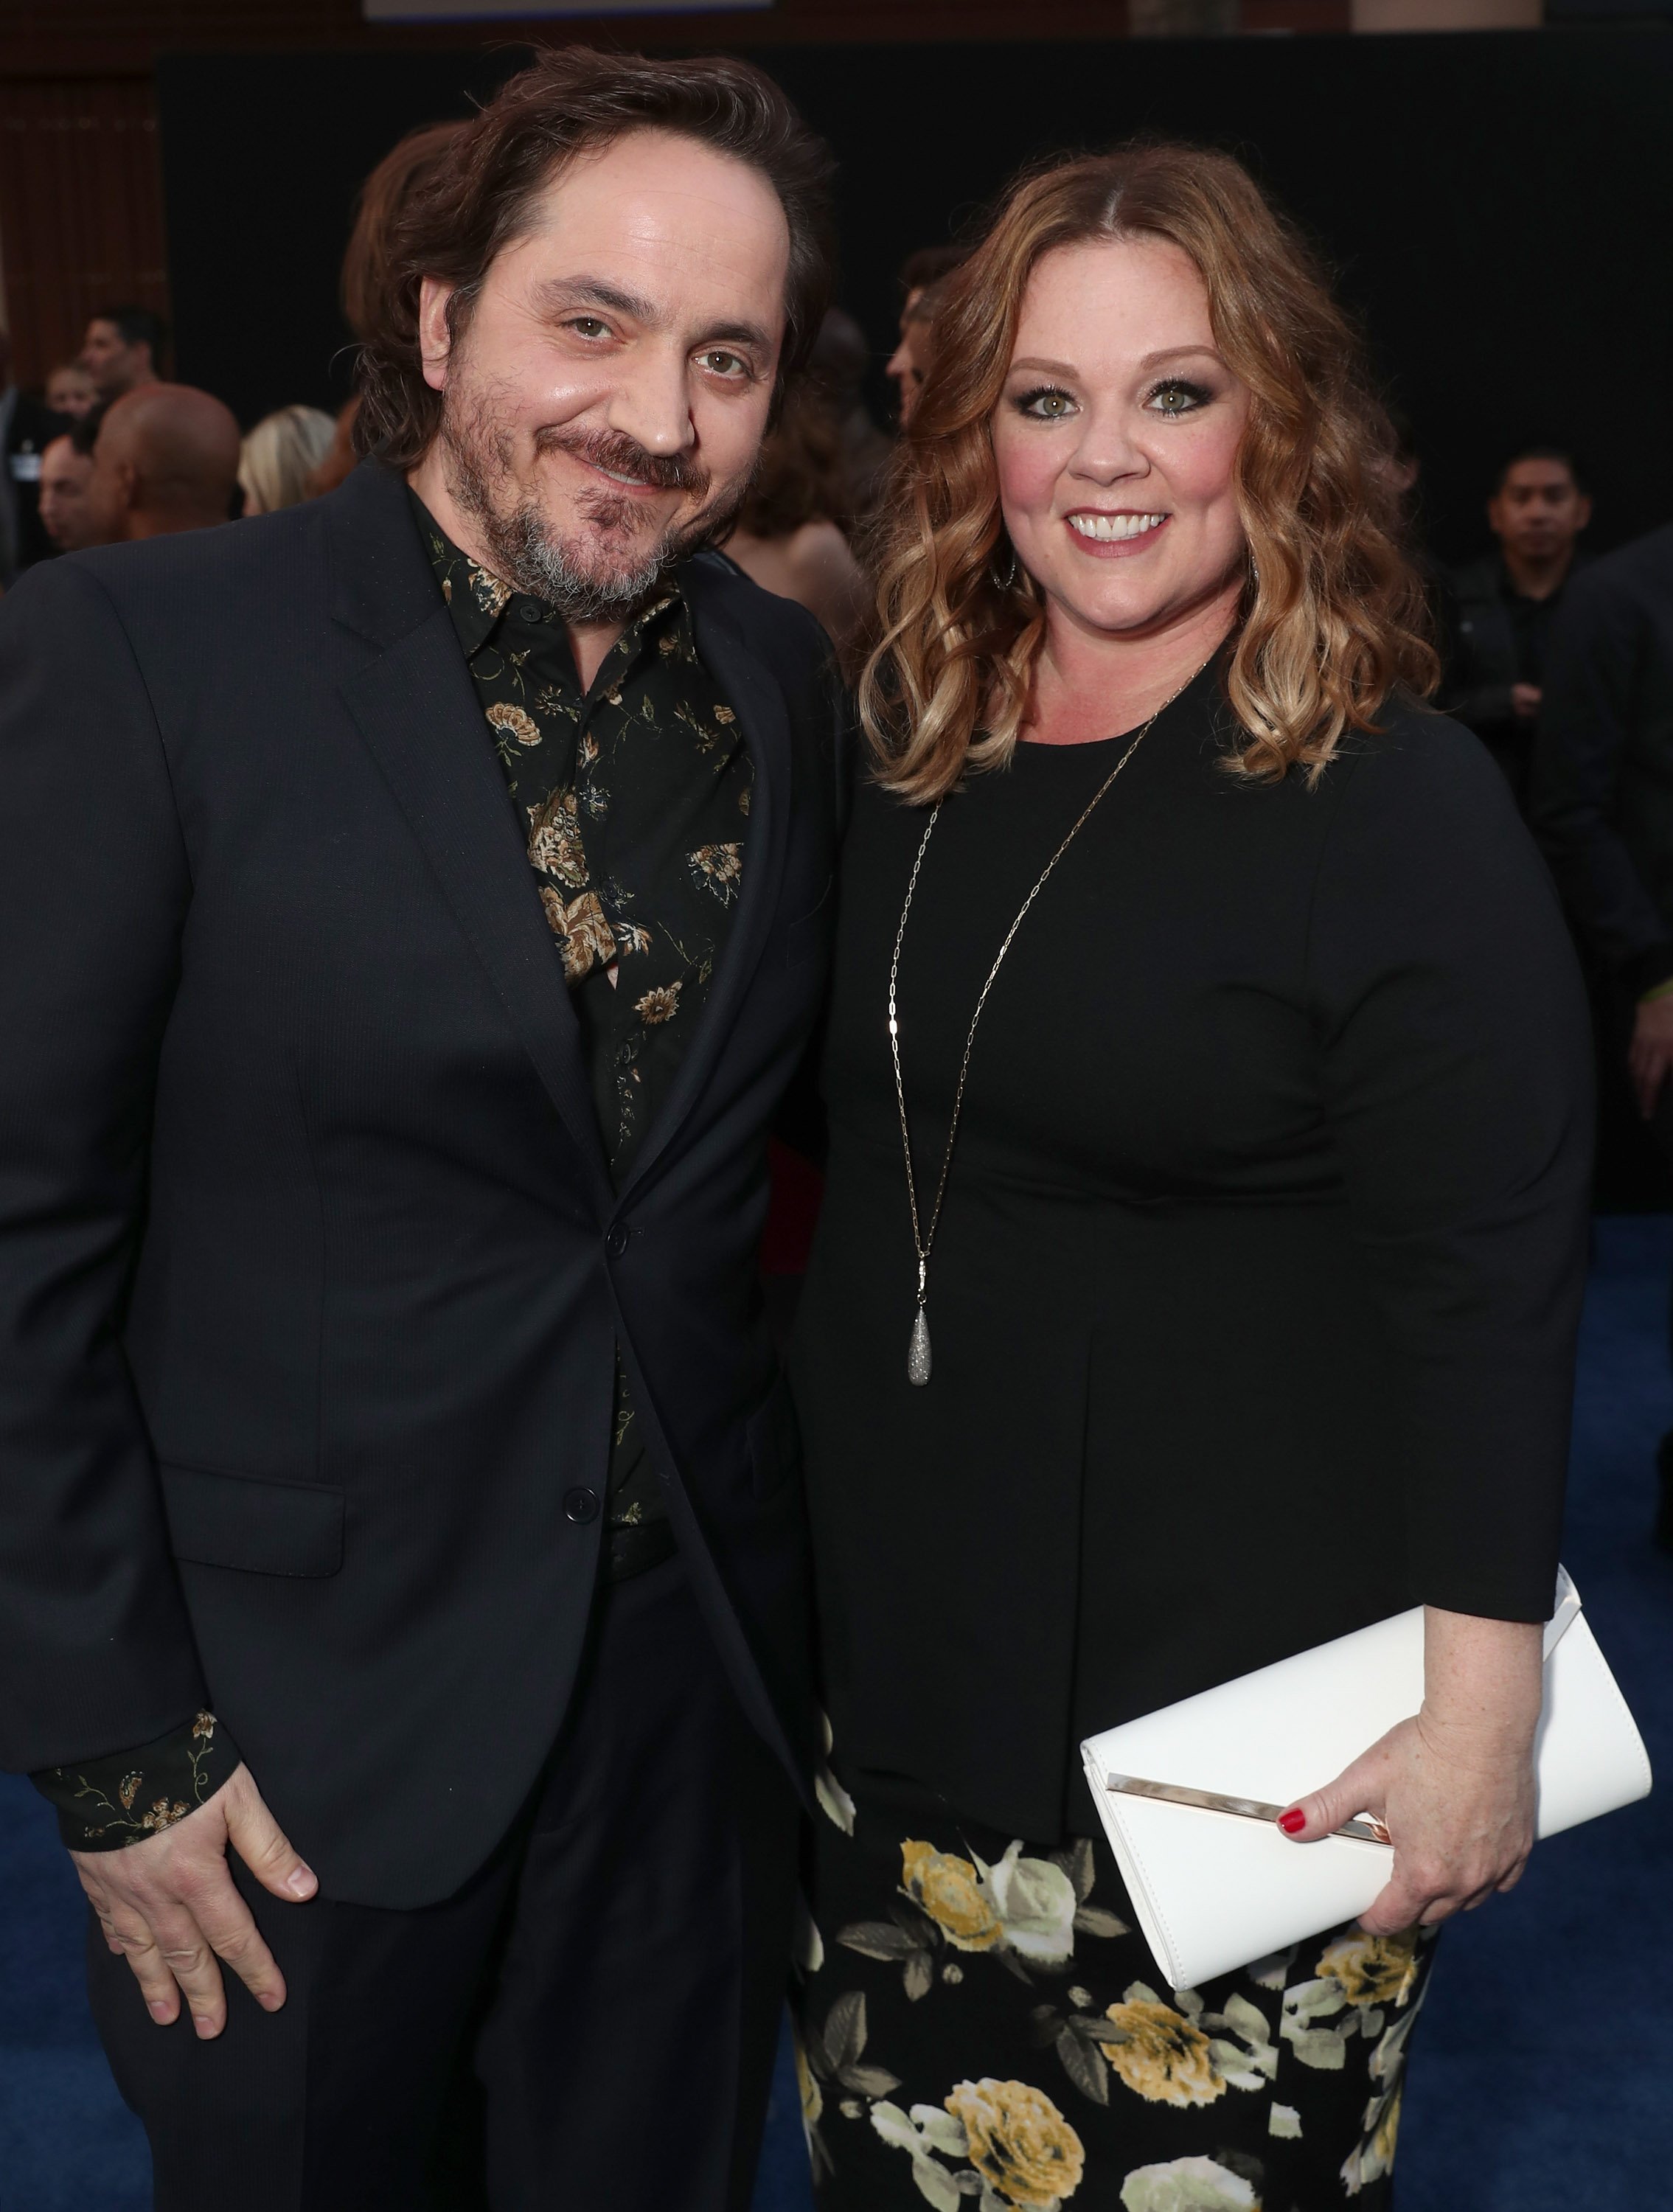  Ben Falcone and Melissa McCarthy attend the premiere of Warner Bros. Pictures' "CHiPS." | Source: Getty Images